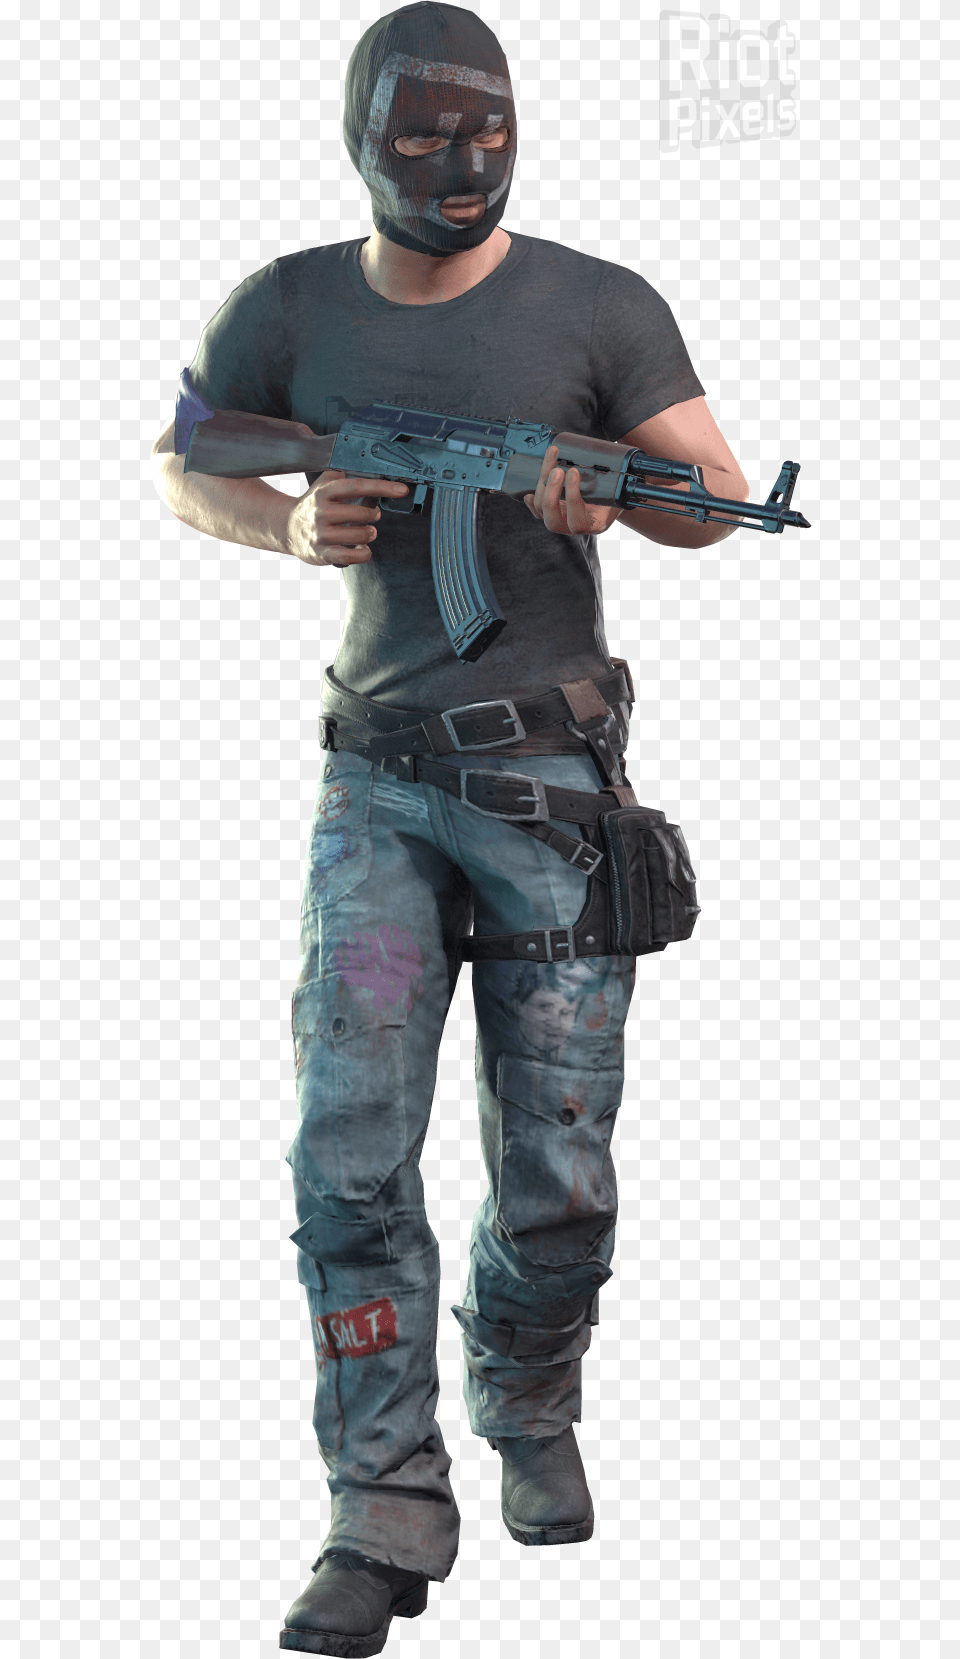 Player Unknown Battlegrounds Twitch Prime, Clothing, Pants, Weapon, Firearm Png